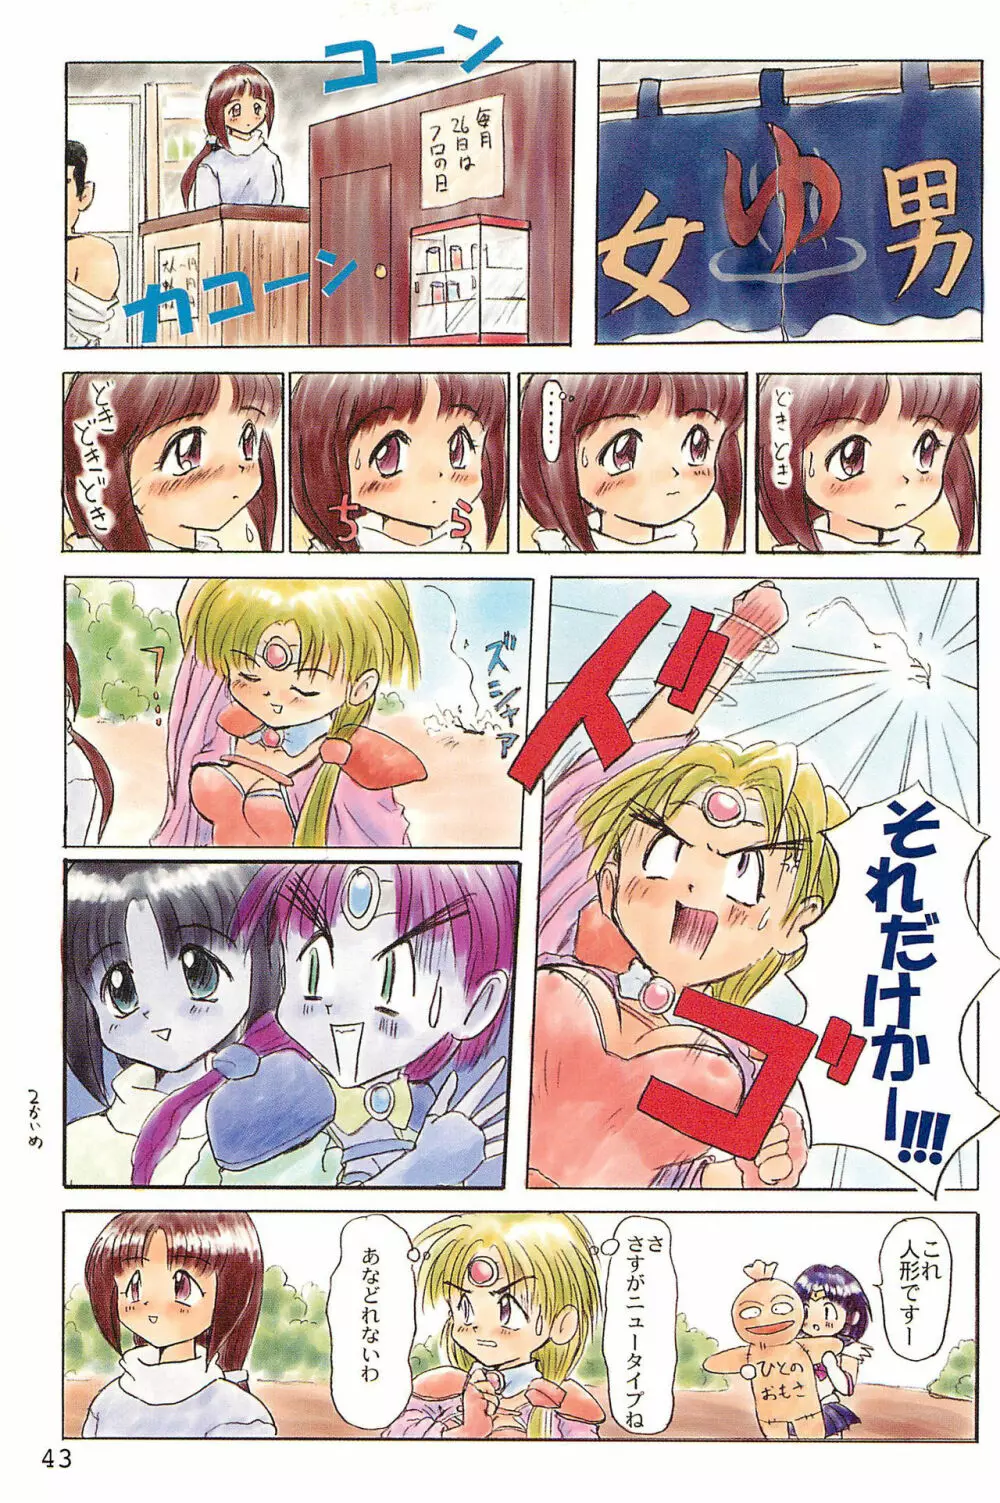 ND-special Volume 1 Page.43